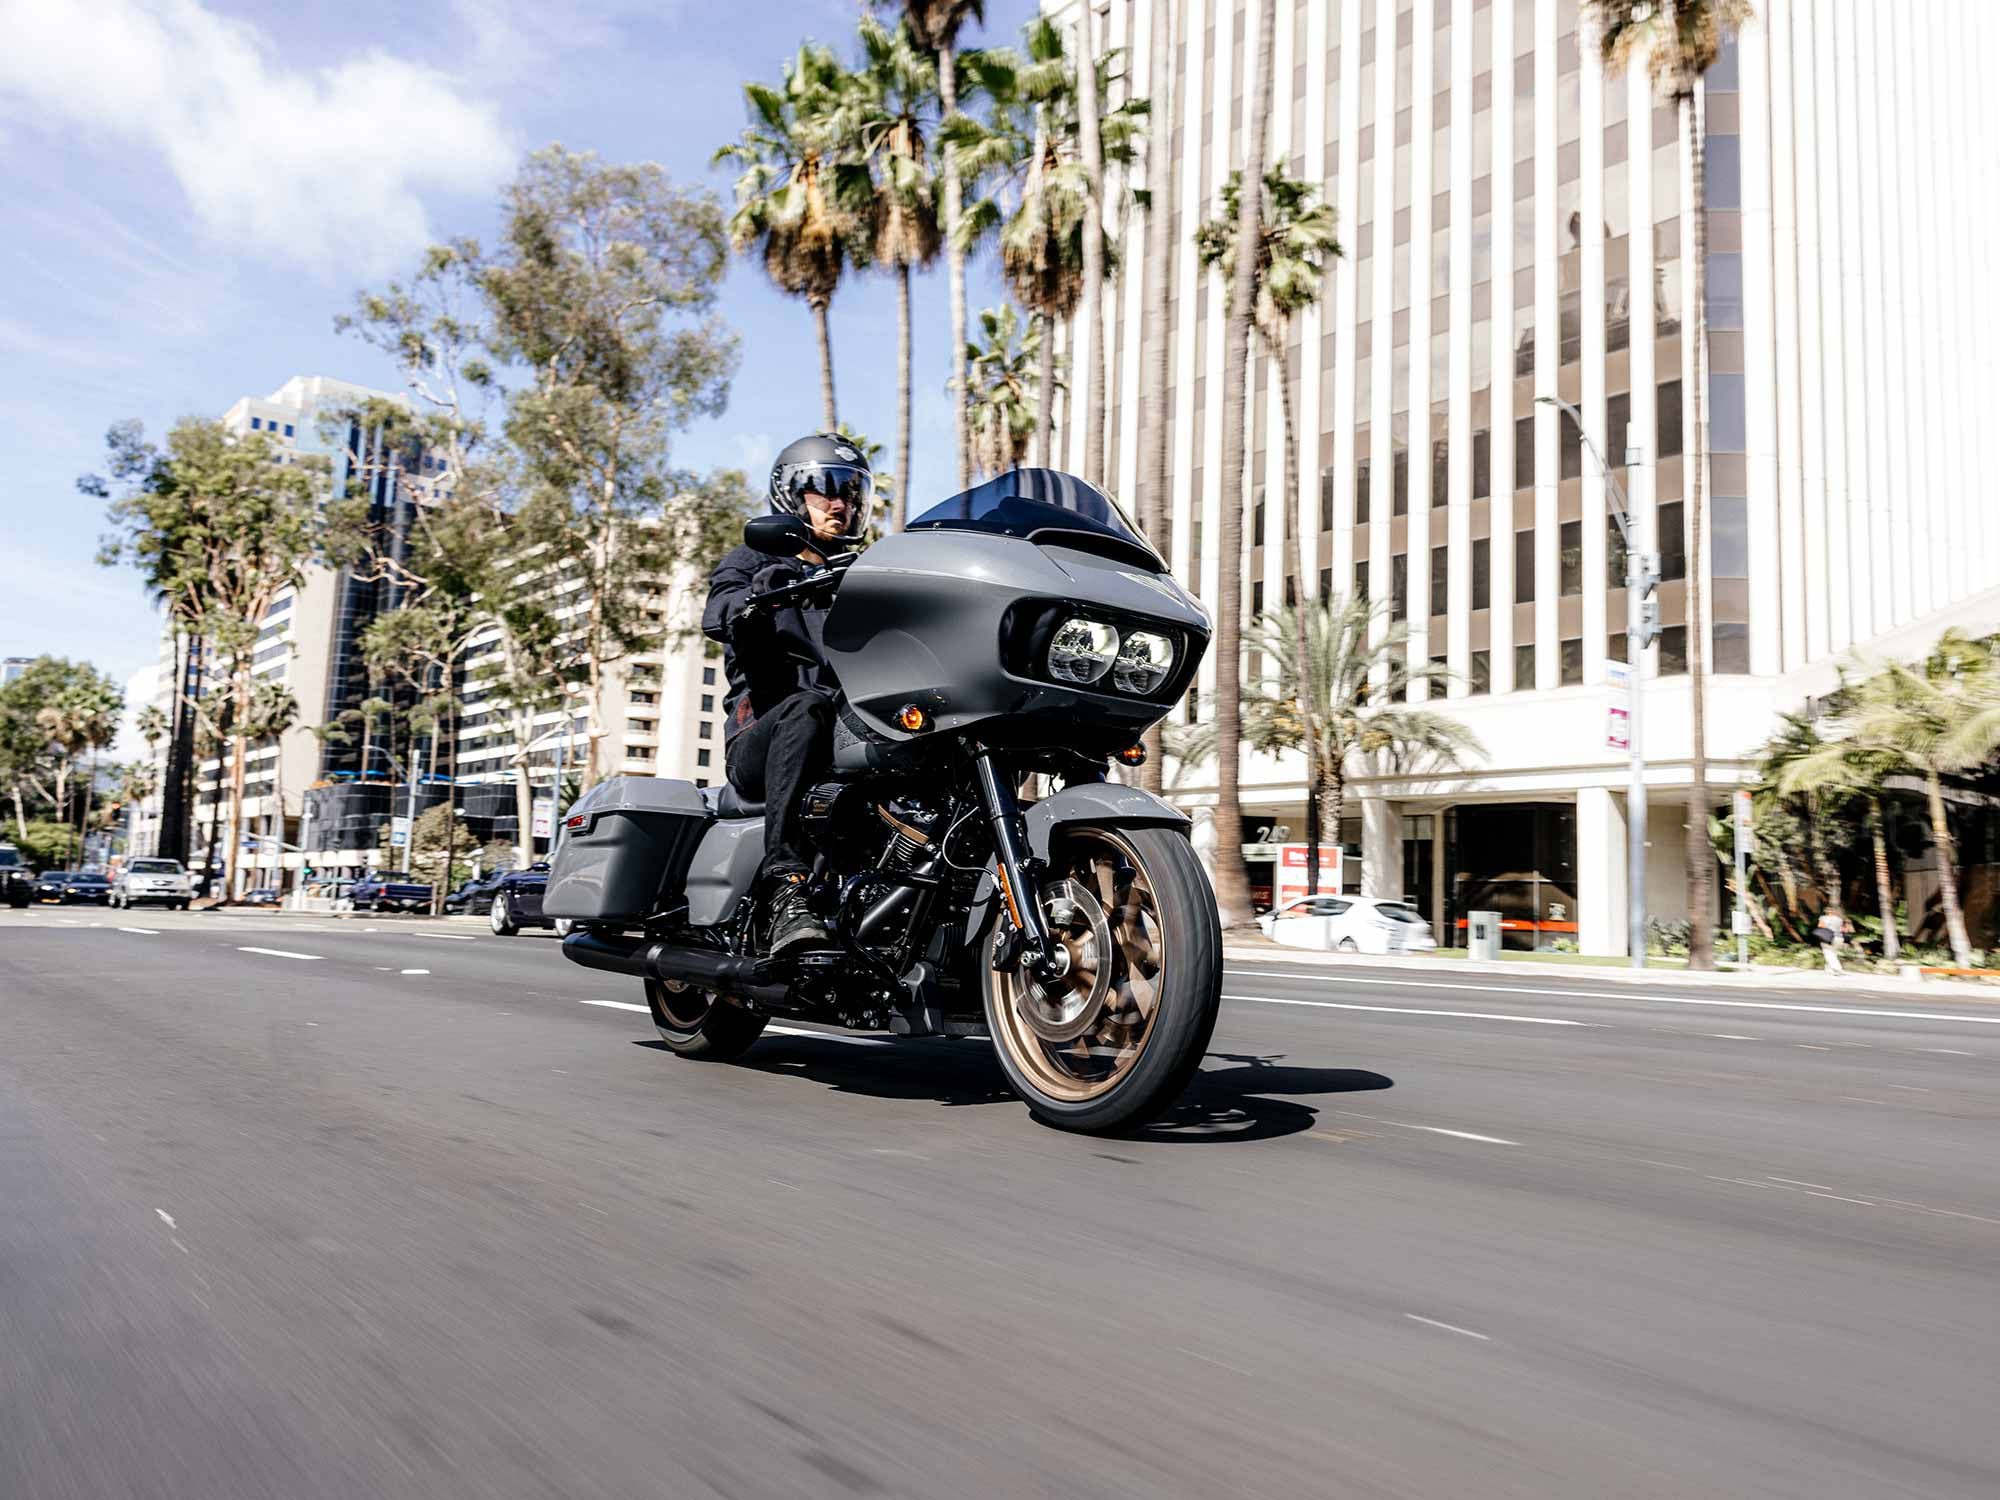 The 2022 Harley-Davidson Road Glide ST is packing a Milwaukee 117 v-twin.